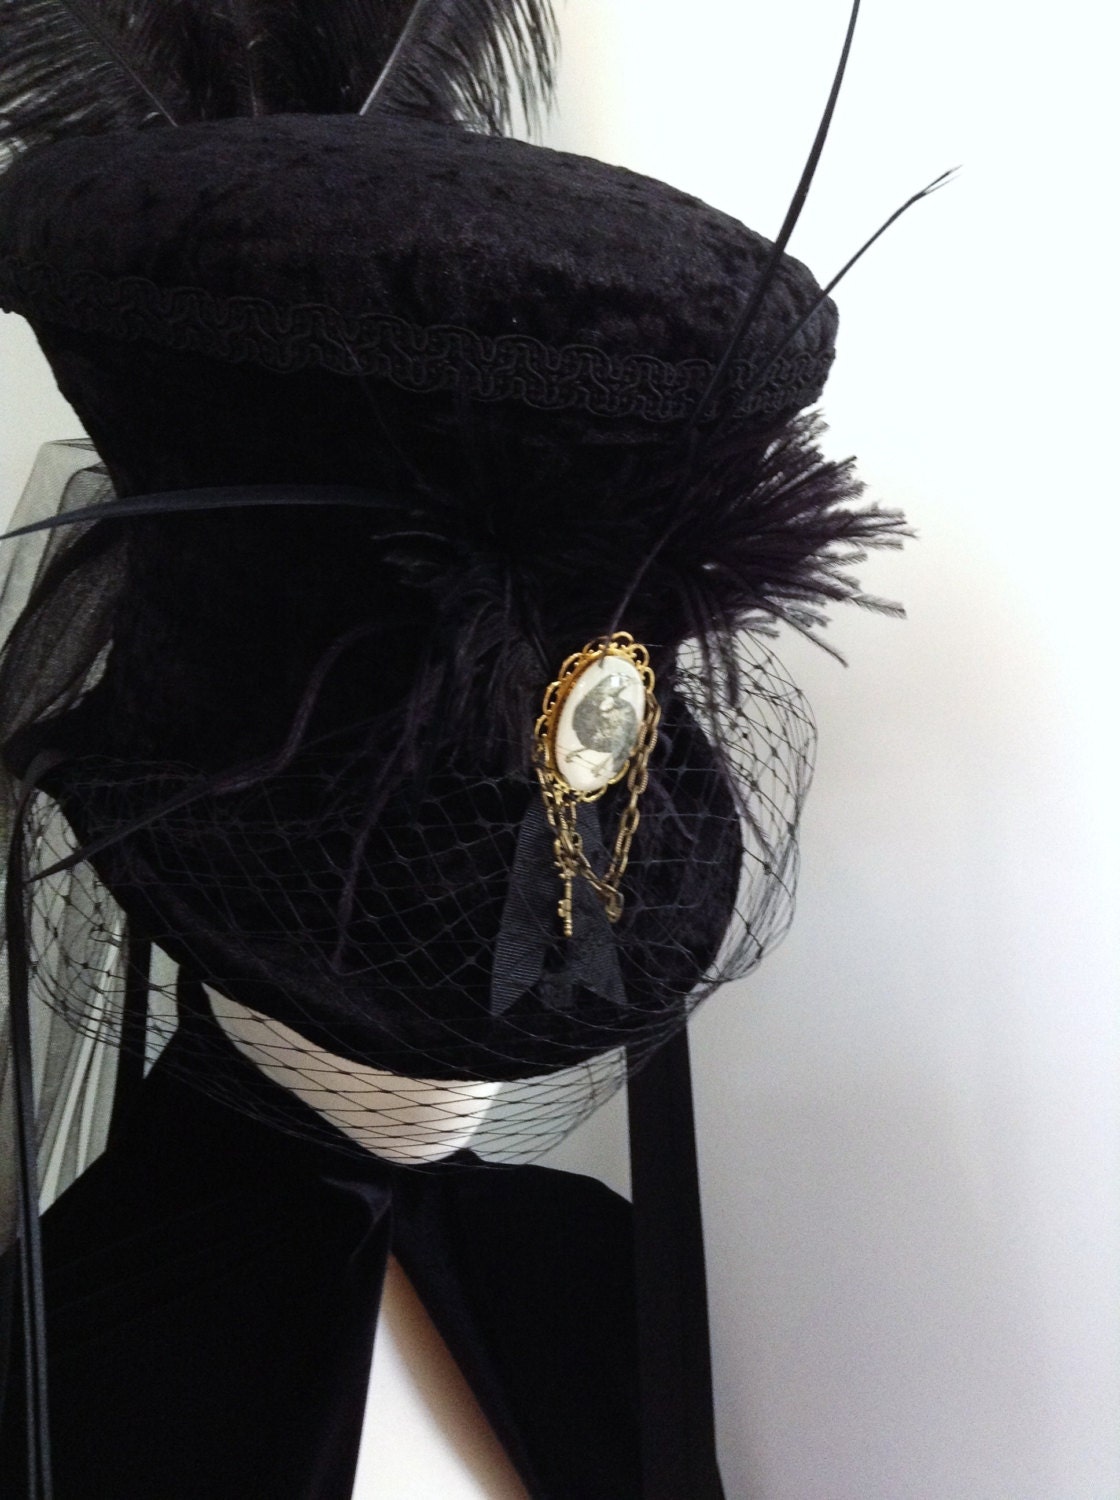 Raven's Mad hatter Victorian mourning/riding hat - Blackpin